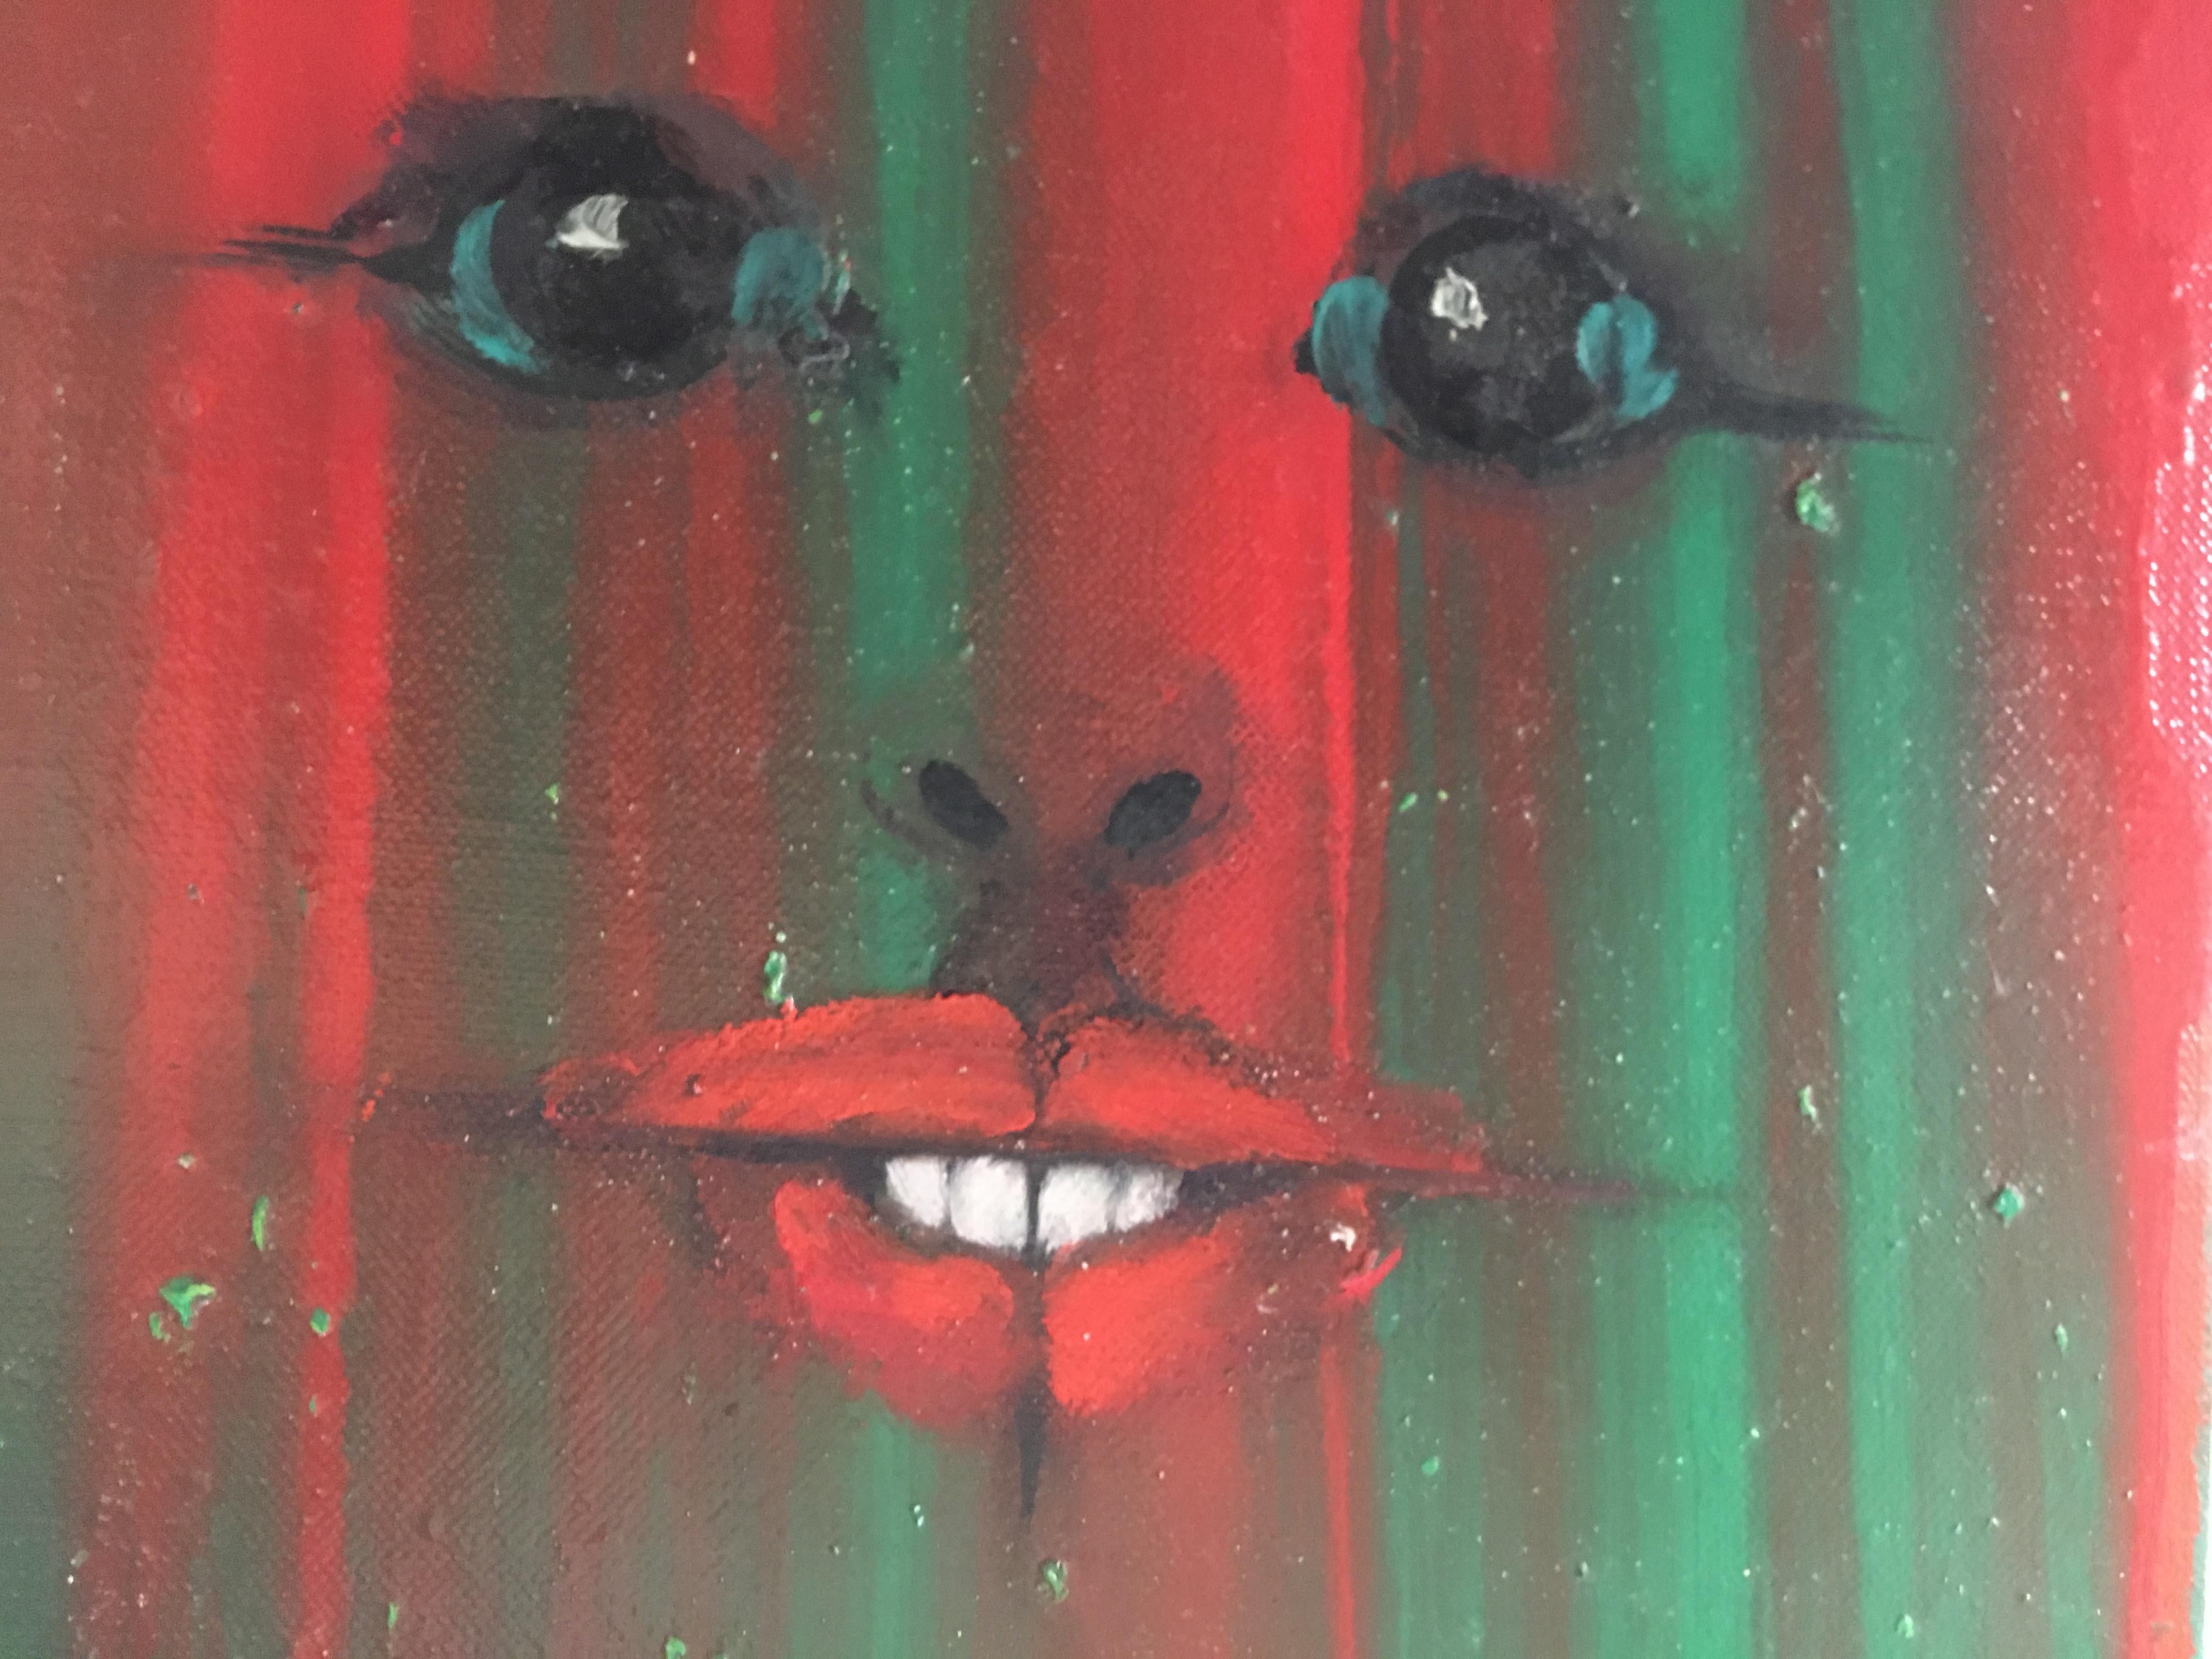 A petite, ultra-vibrant red and green painting of a mousy, wide-eyed face against a sweeping backdrop of color. Signed Radoczy, January 1965.
Very different from his usual work.

Albert Radoczy was a painter from the NY Tristate area, most